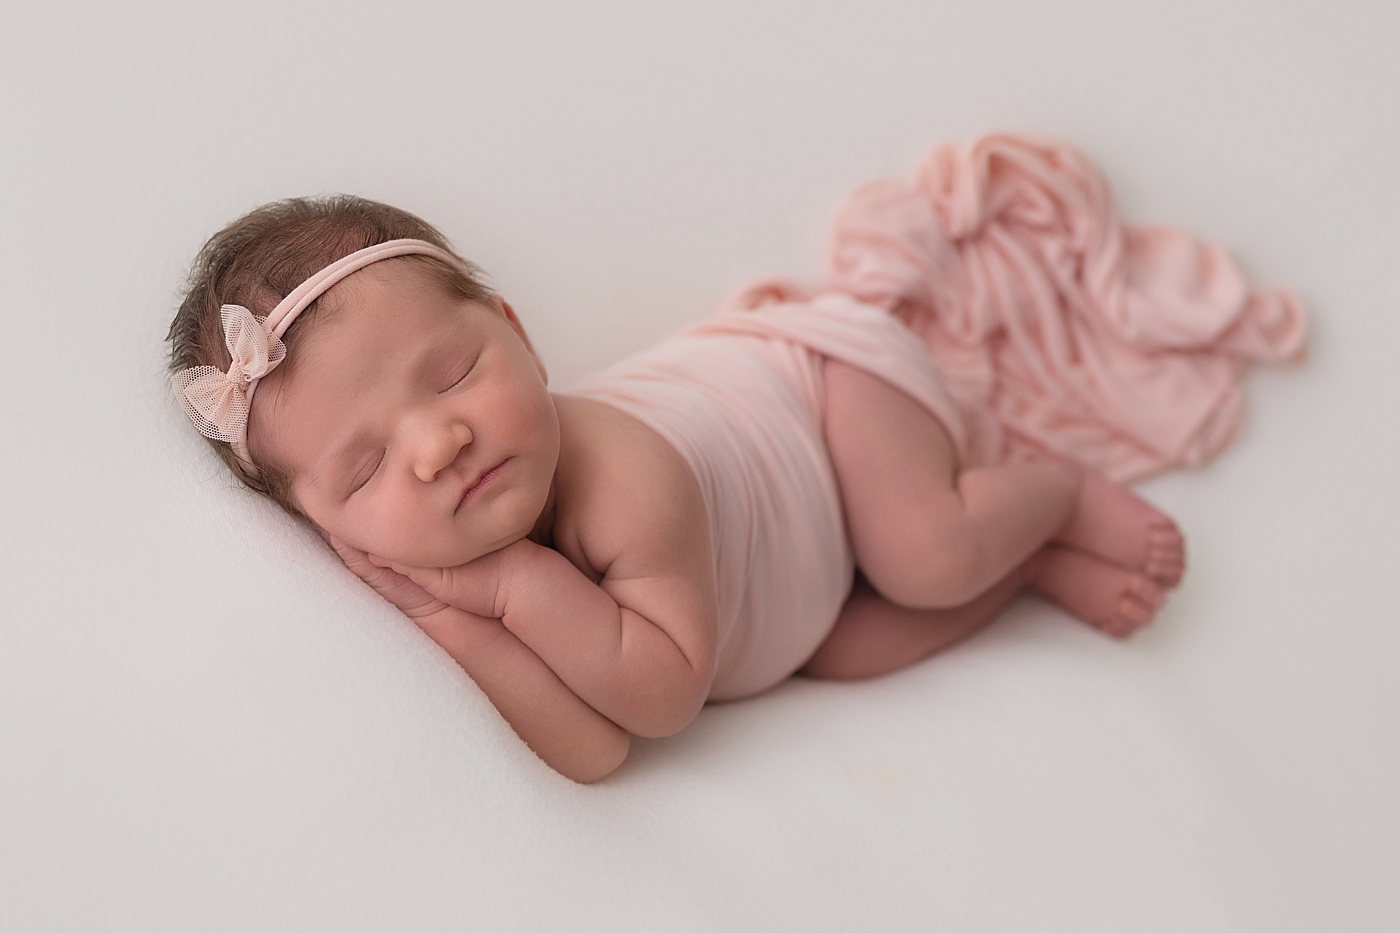 Baby girl posed on her side wearing pink for newborn photos. Photo by Rachel Brookes Photography.